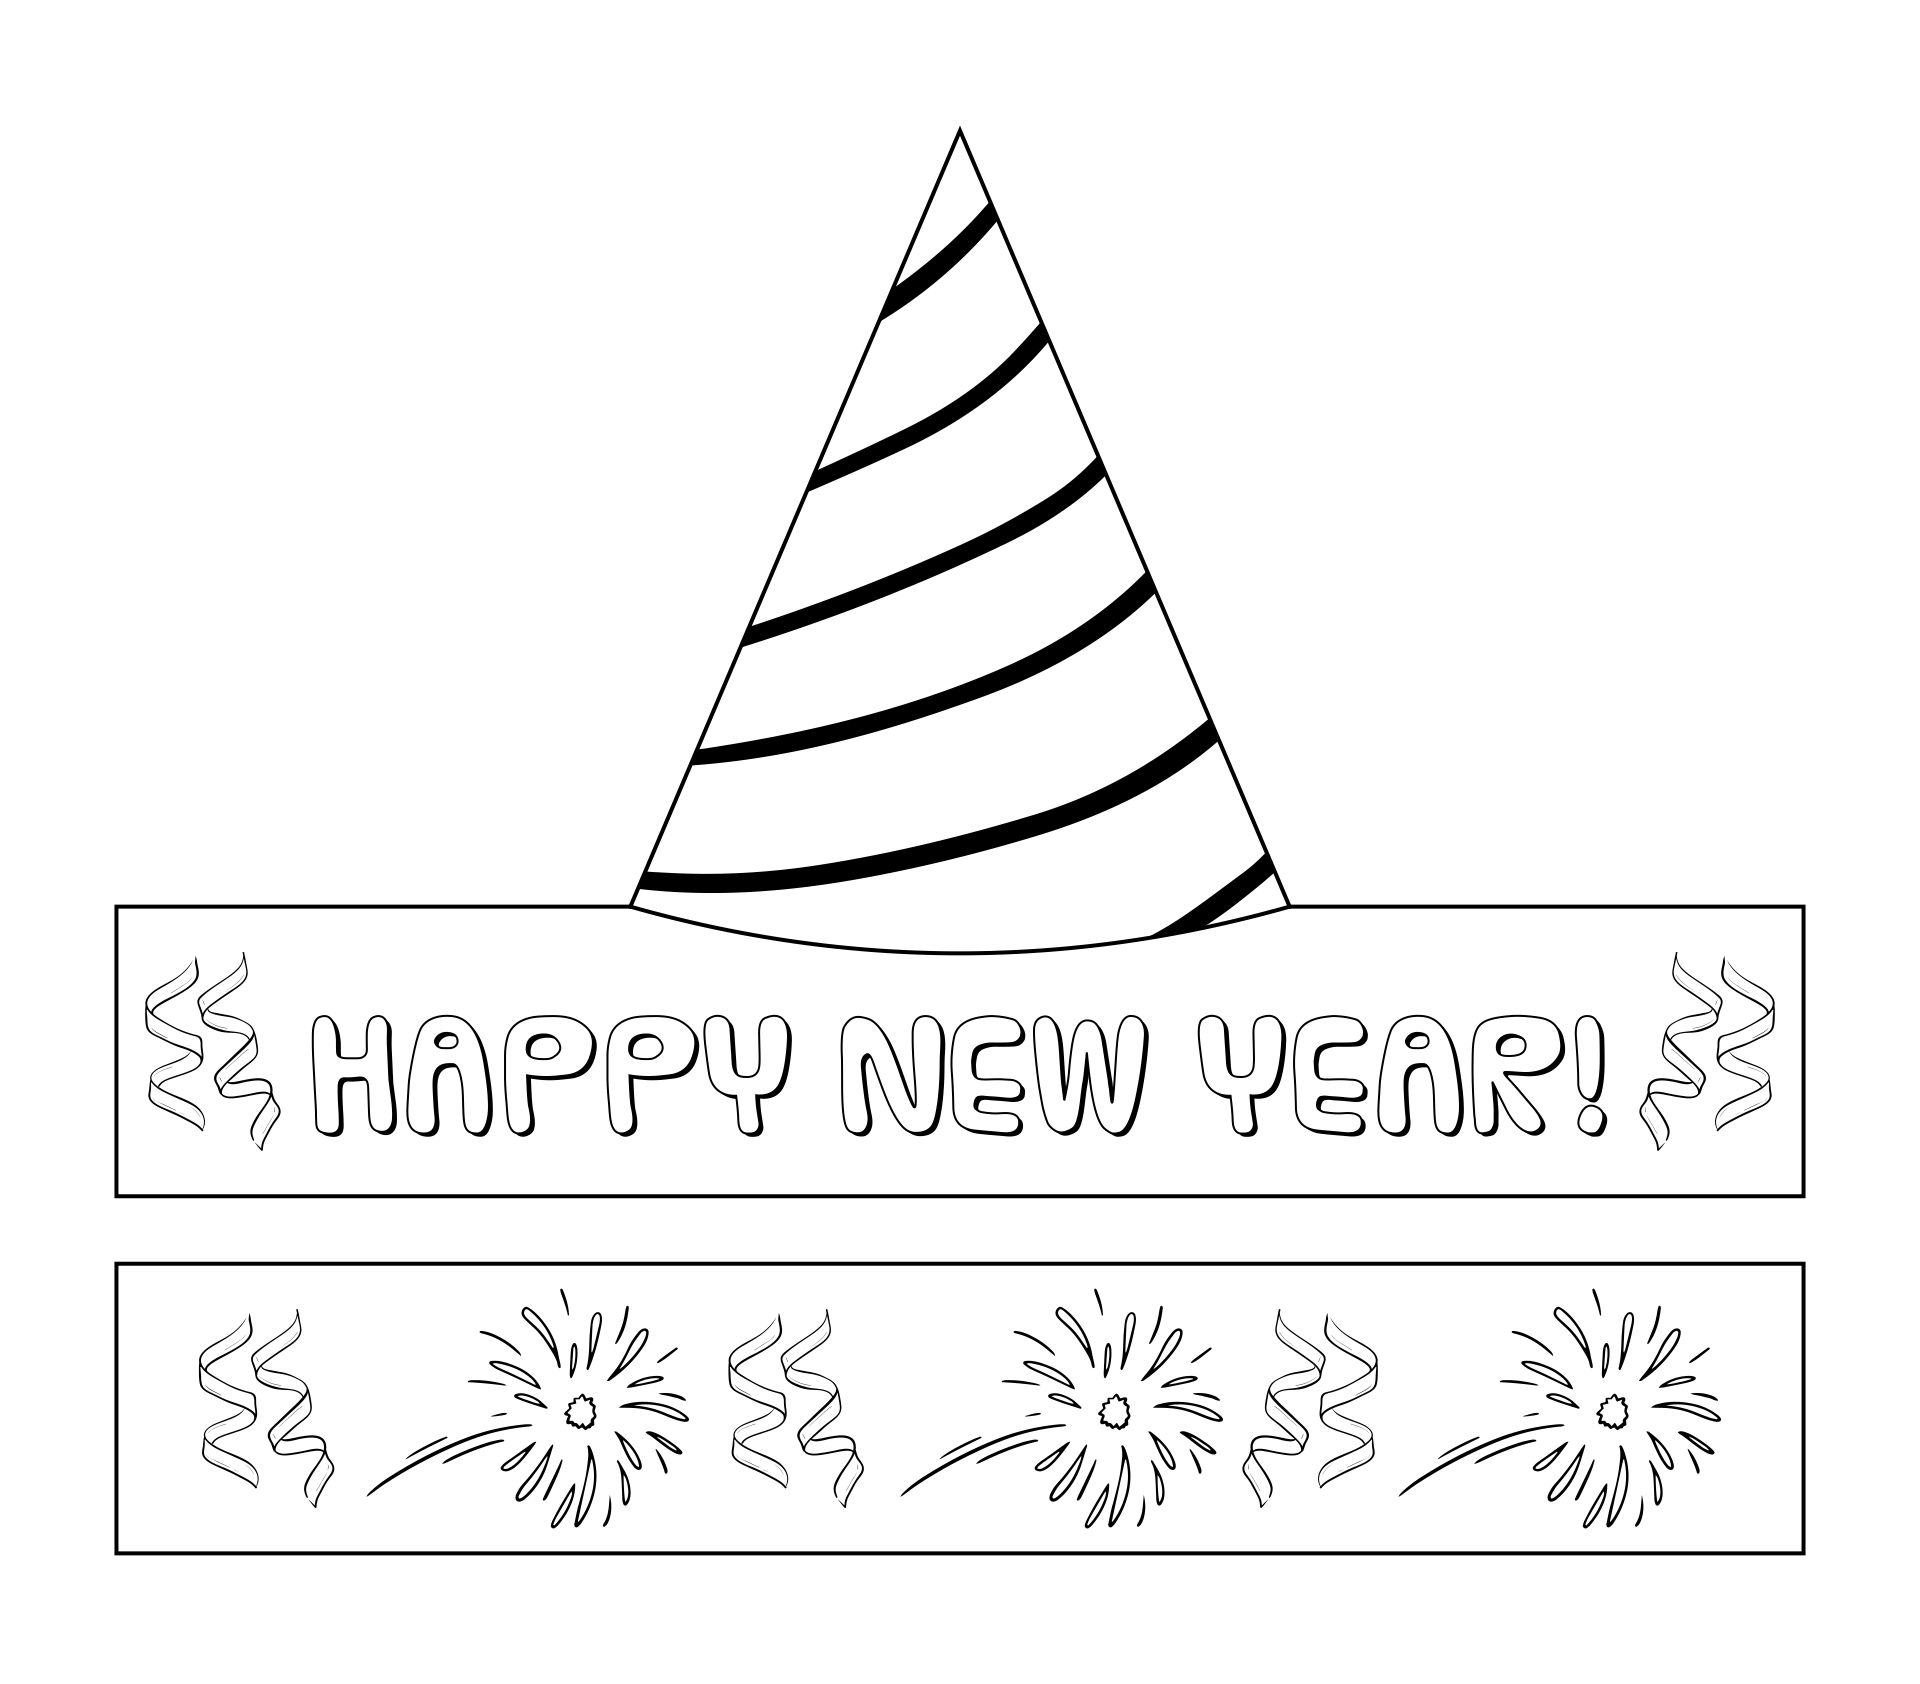 7 Best Images of Blank Printable Party Hats New Year Party Hat